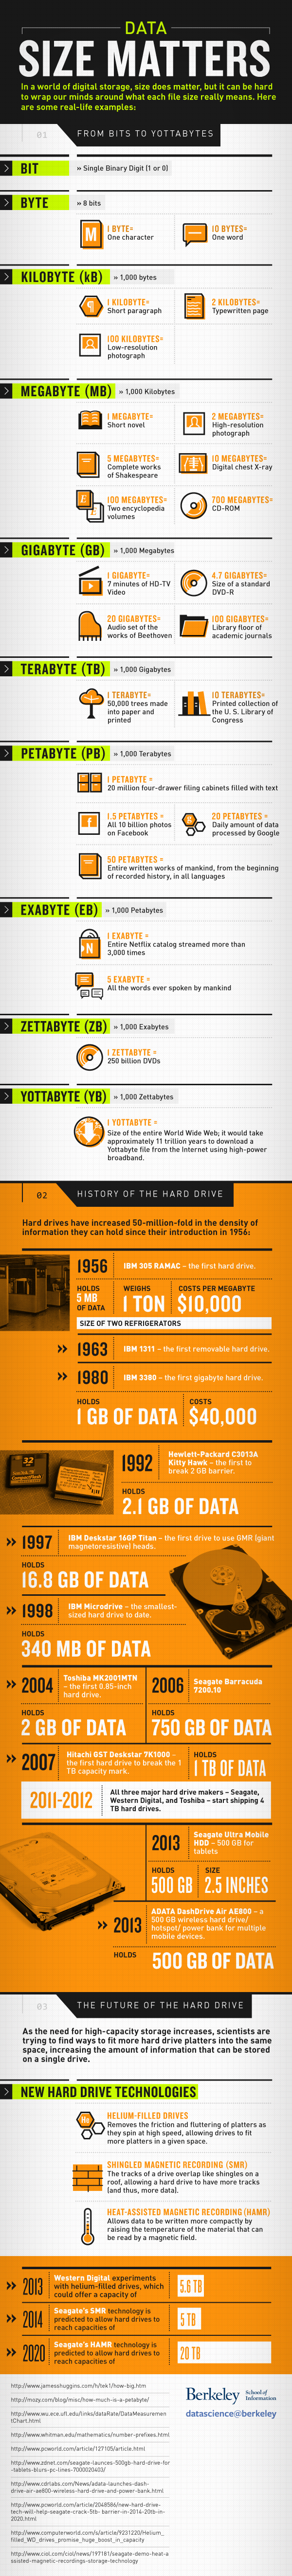 Data Size Matters Infographic